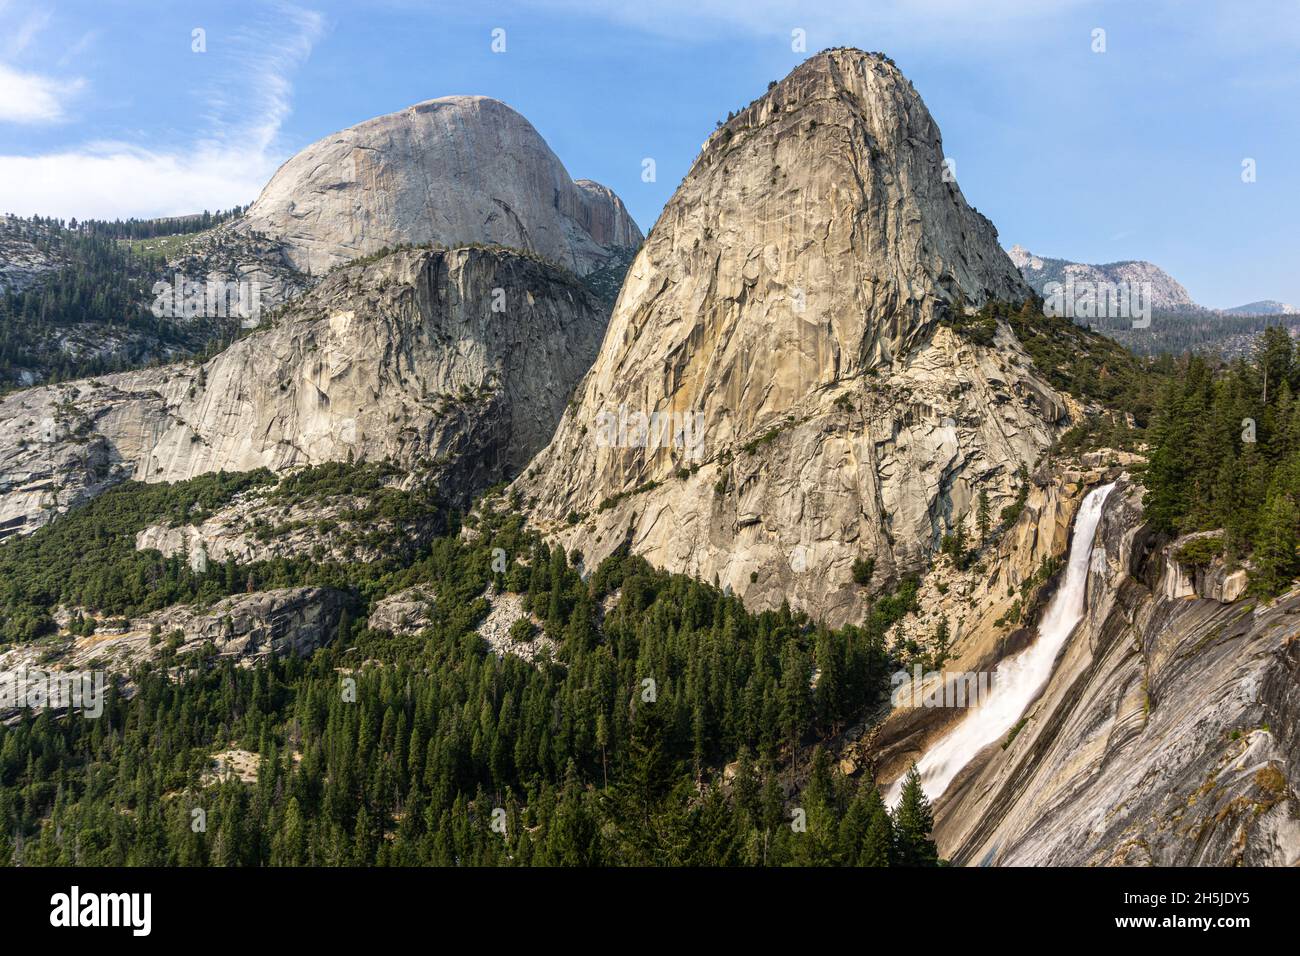 Breathtaking view on Nevada fall and Liberty cap mountain. Typical beautiful sunny day in Yosemite National Park. Stock Photo